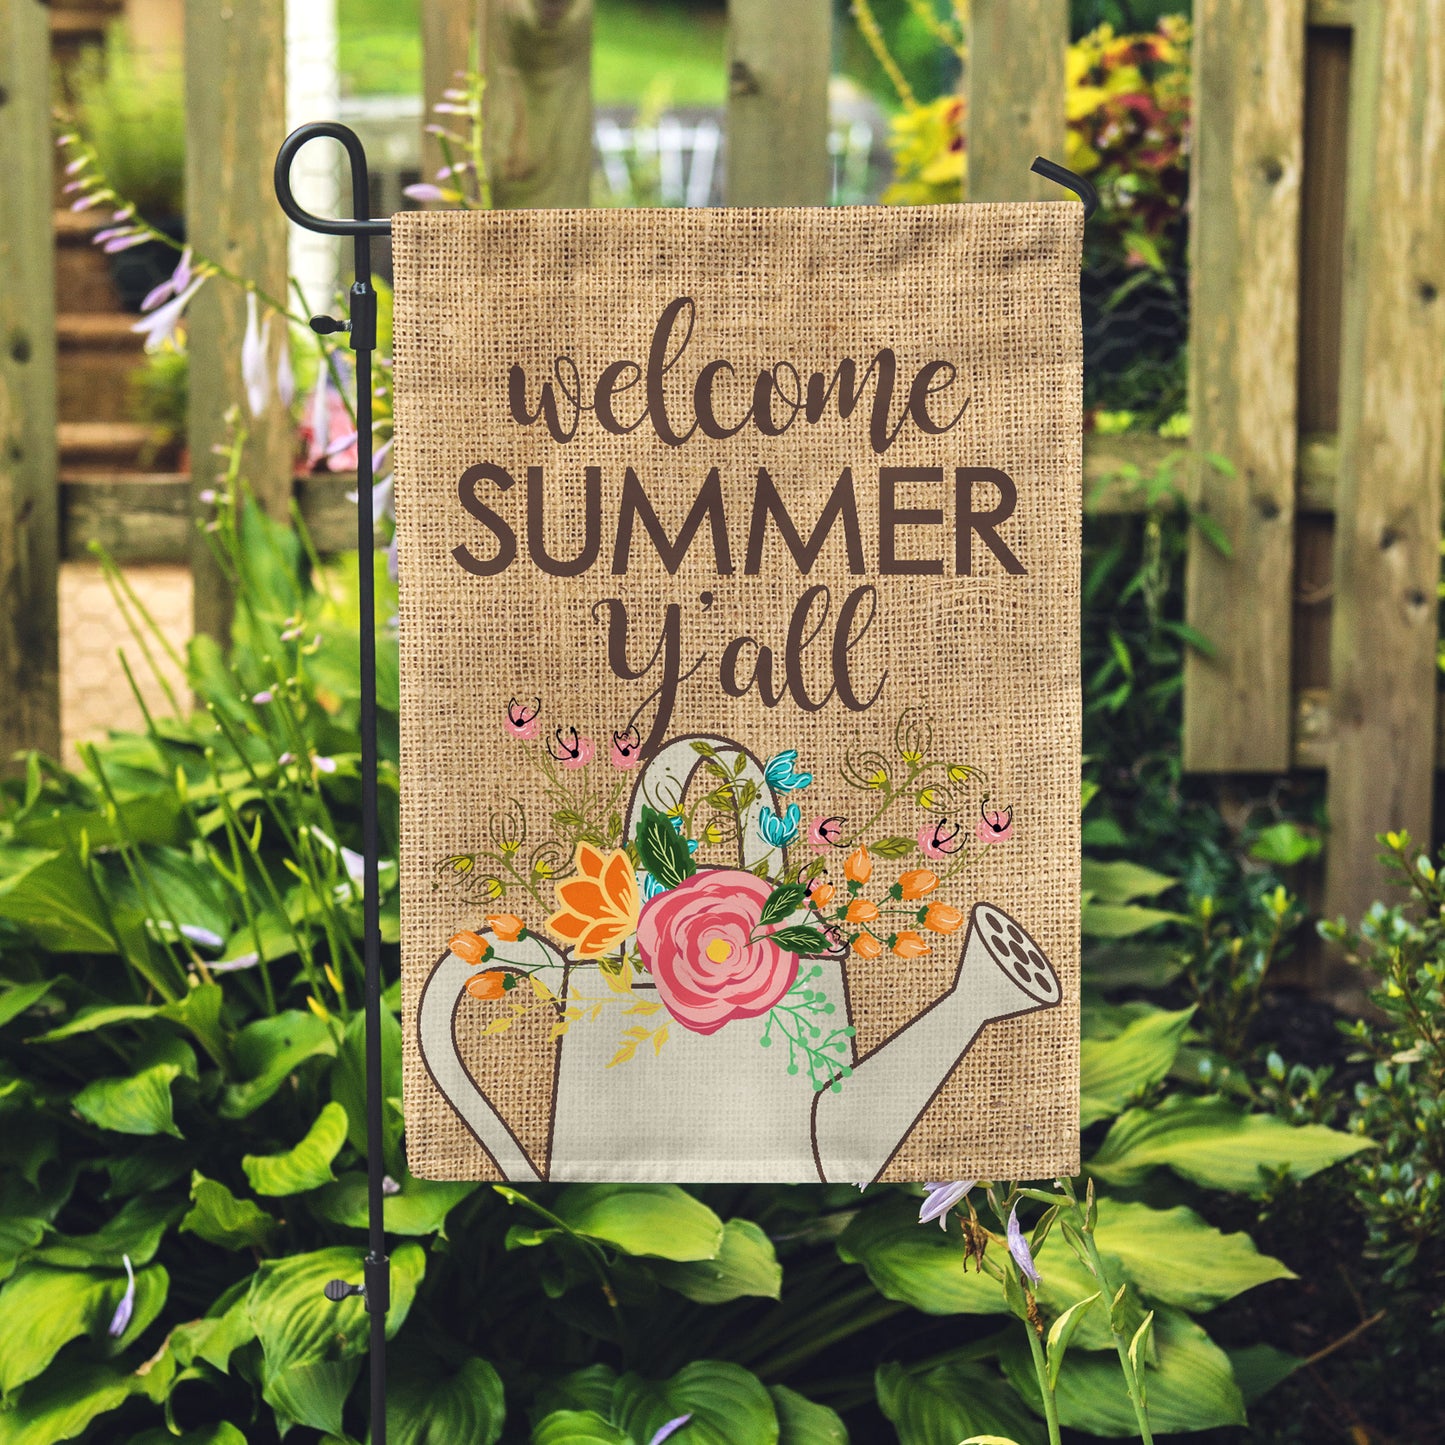 Welcome Summer Y'all Garden Flag - Second East